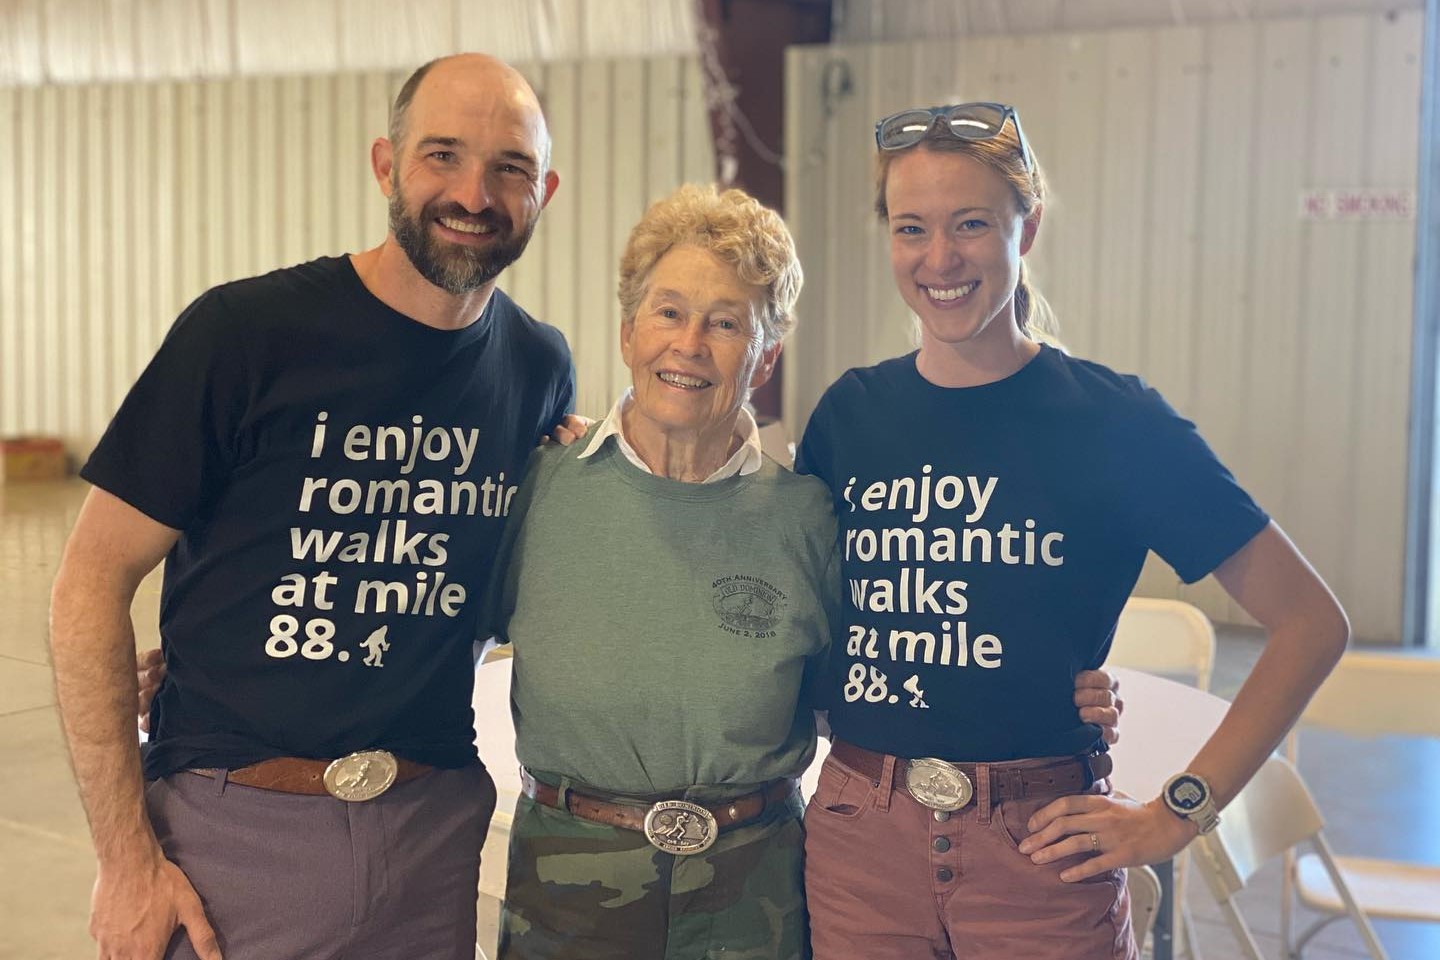 Ben D and Emily L wearing matching shirts that say 'i enjoy romatice walks at mile 88.4' poses with founder, Pat Botts